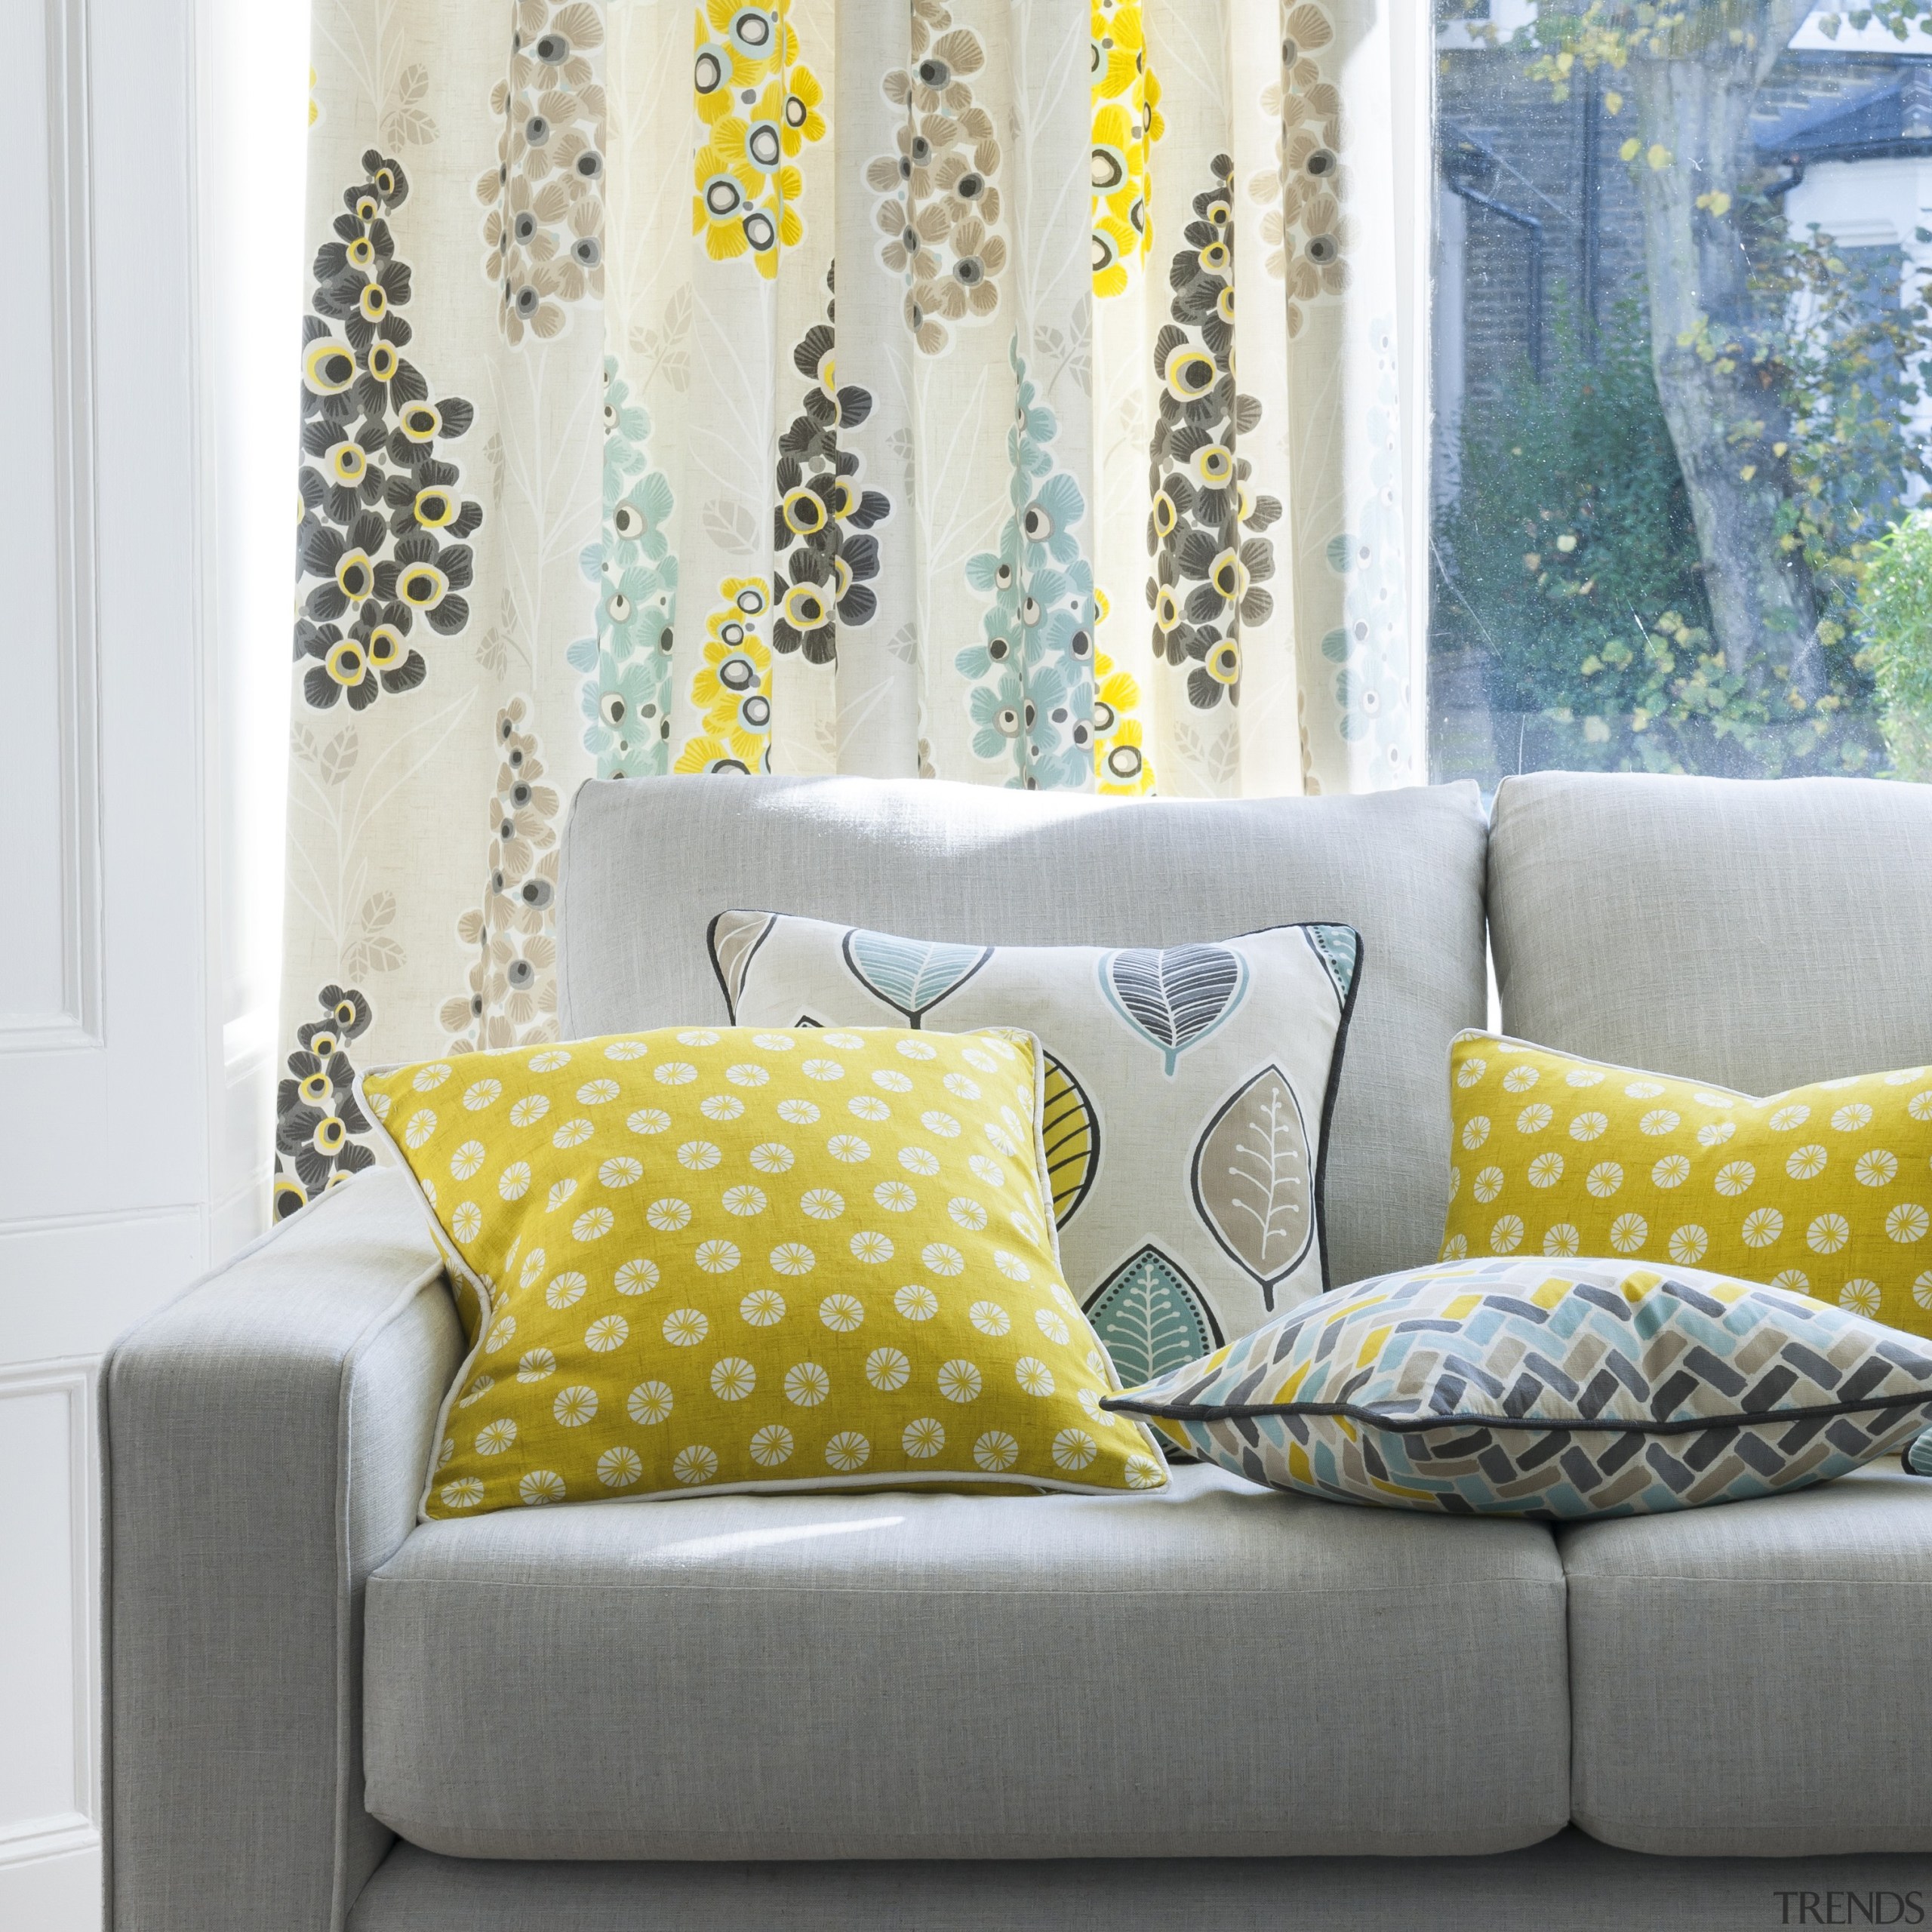 Harrisons Curtains - Harrisons Curtains - couch | couch, curtain, cushion, duvet cover, furniture, home, interior design, linens, living room, pattern, room, textile, wall, window, window covering, window treatment, yellow, white, gray